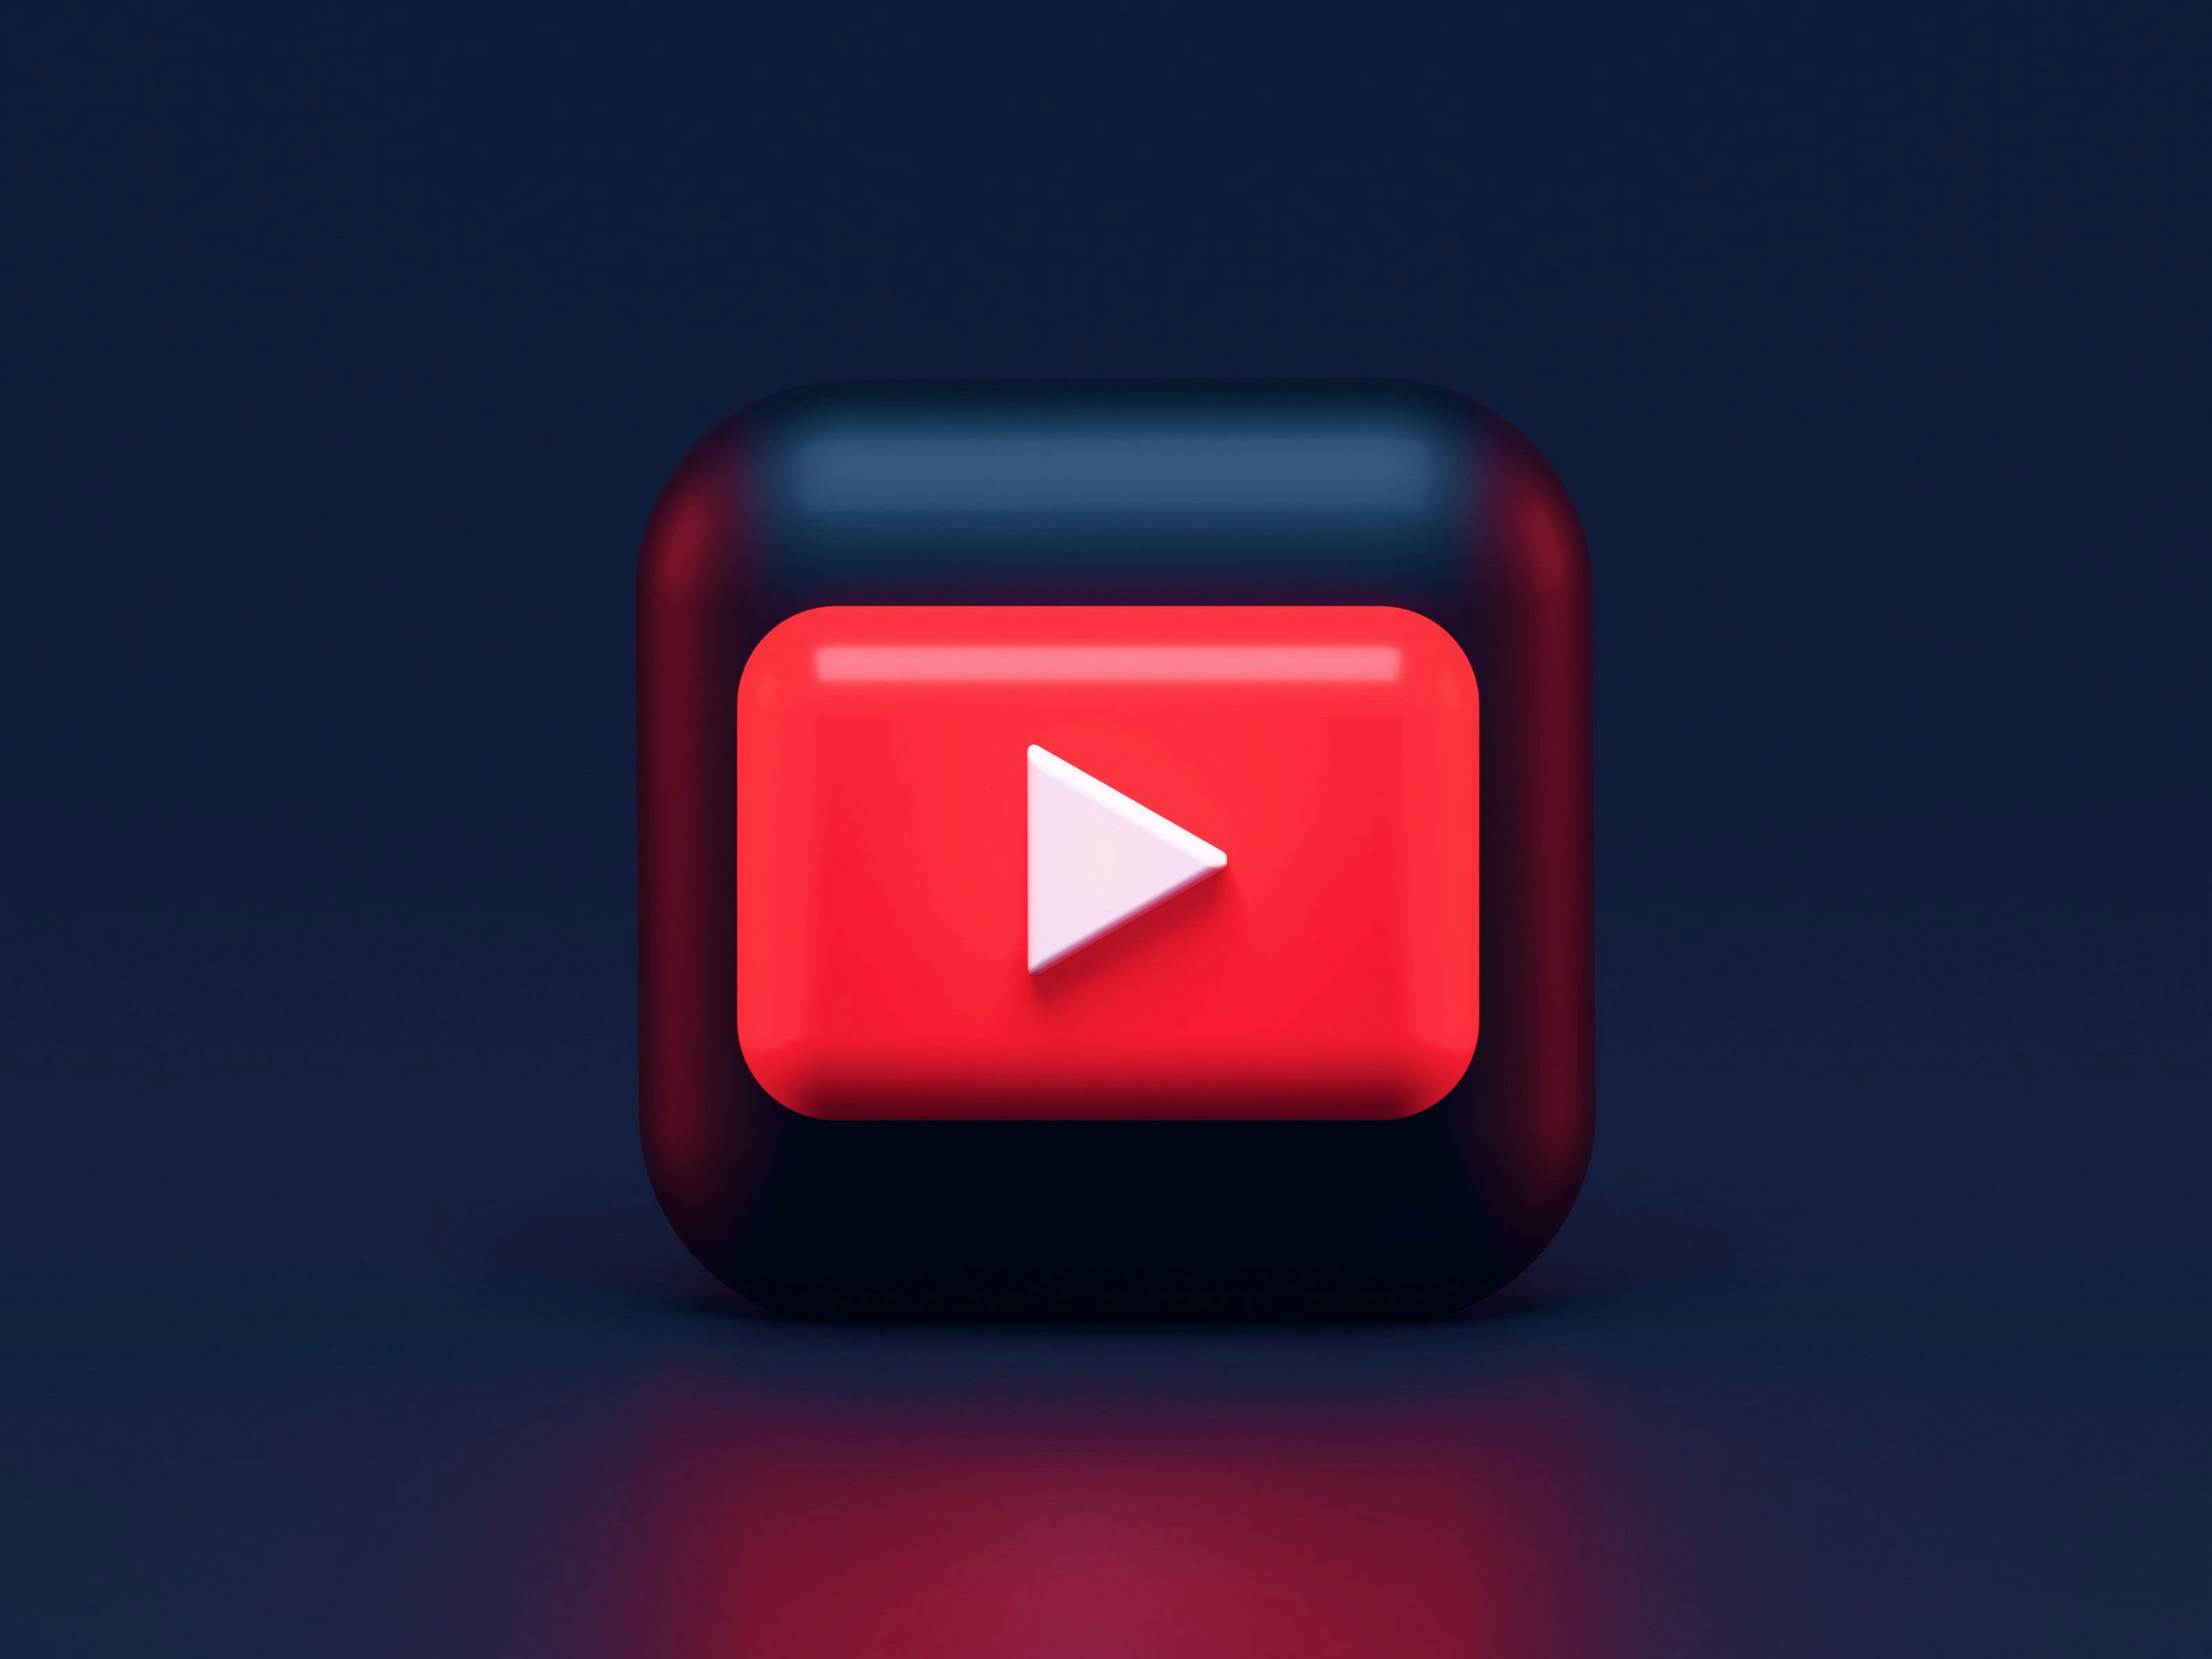 video "play" button